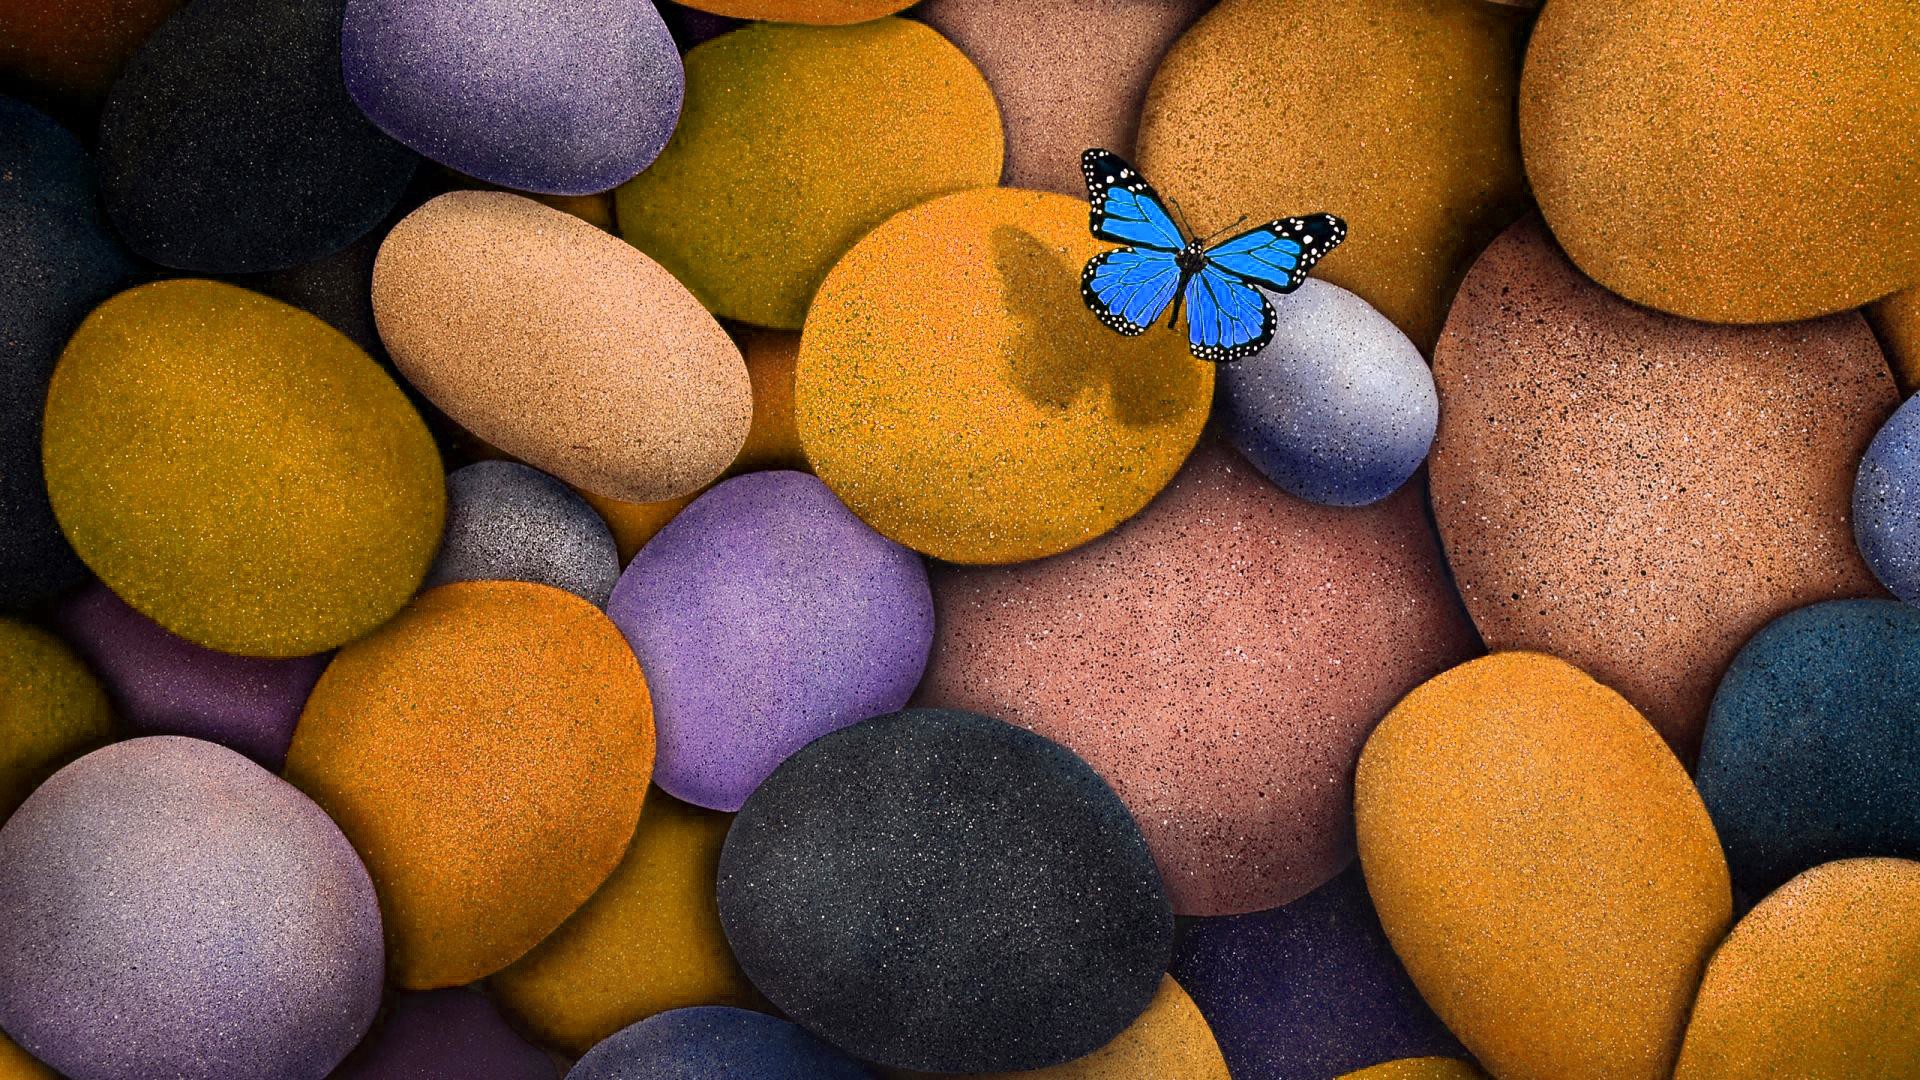 Download 3d Wallpaper Hd For Laptop Blue Rocks And Butterfly 1920x1080 Wallpaper Teahub Io